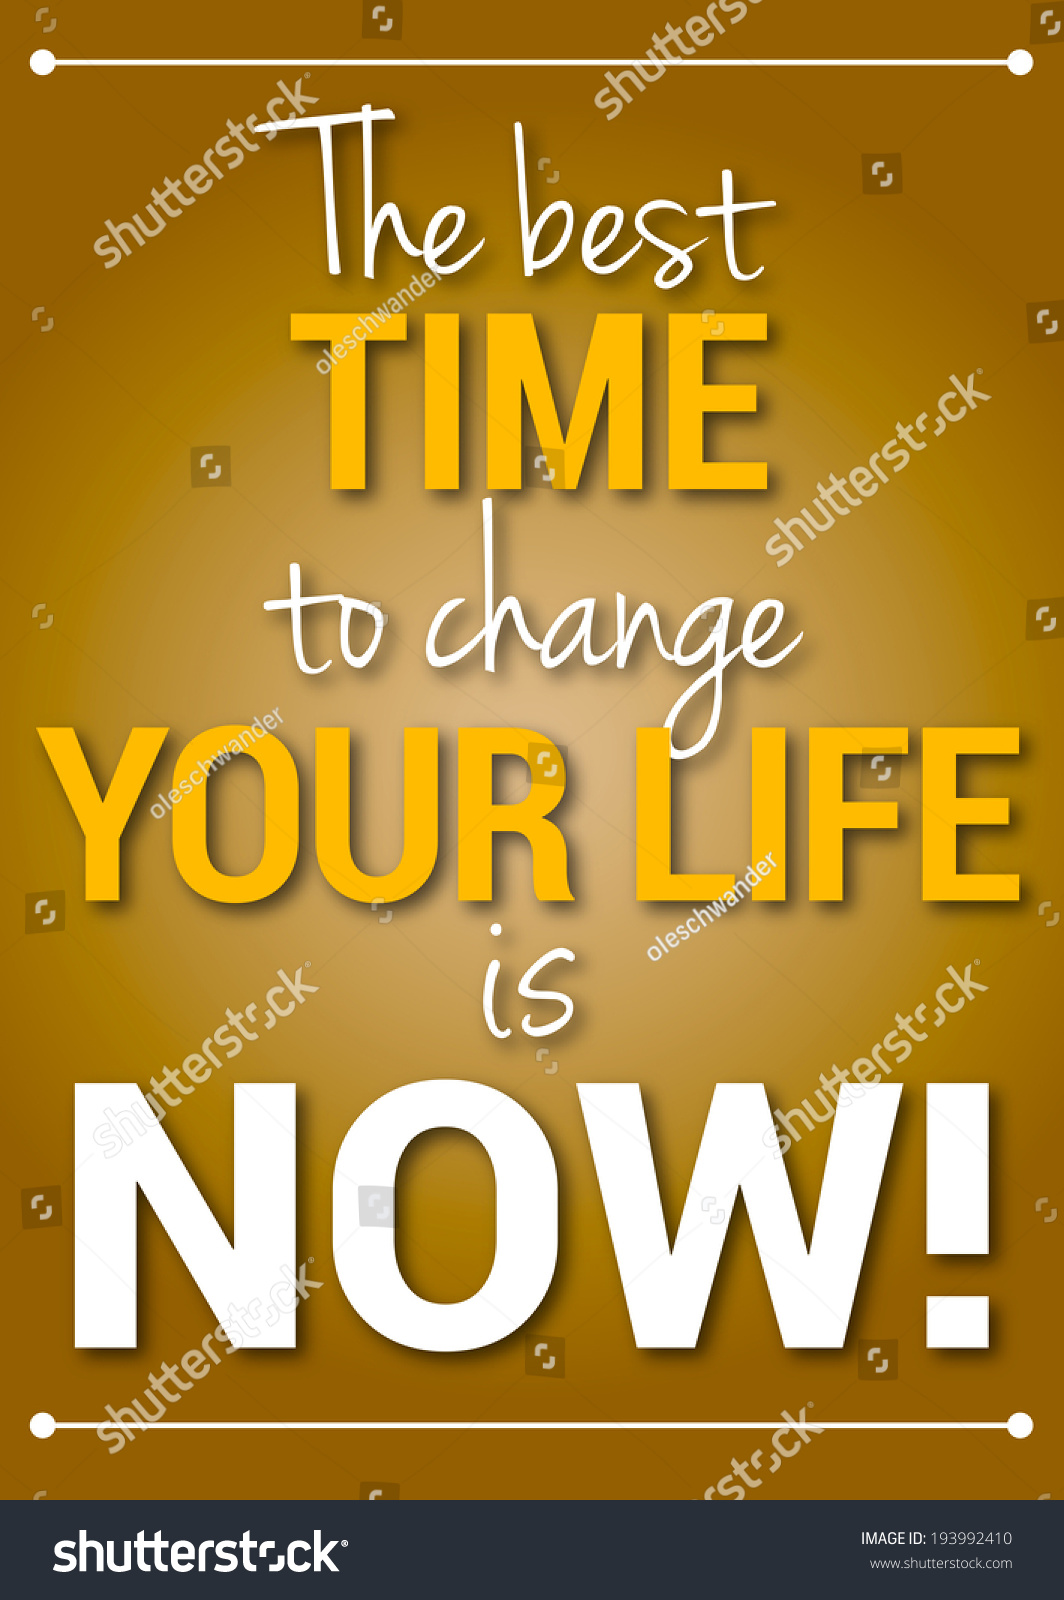 Slide Motivational Quotation Proverb Saying The Best Time To Change